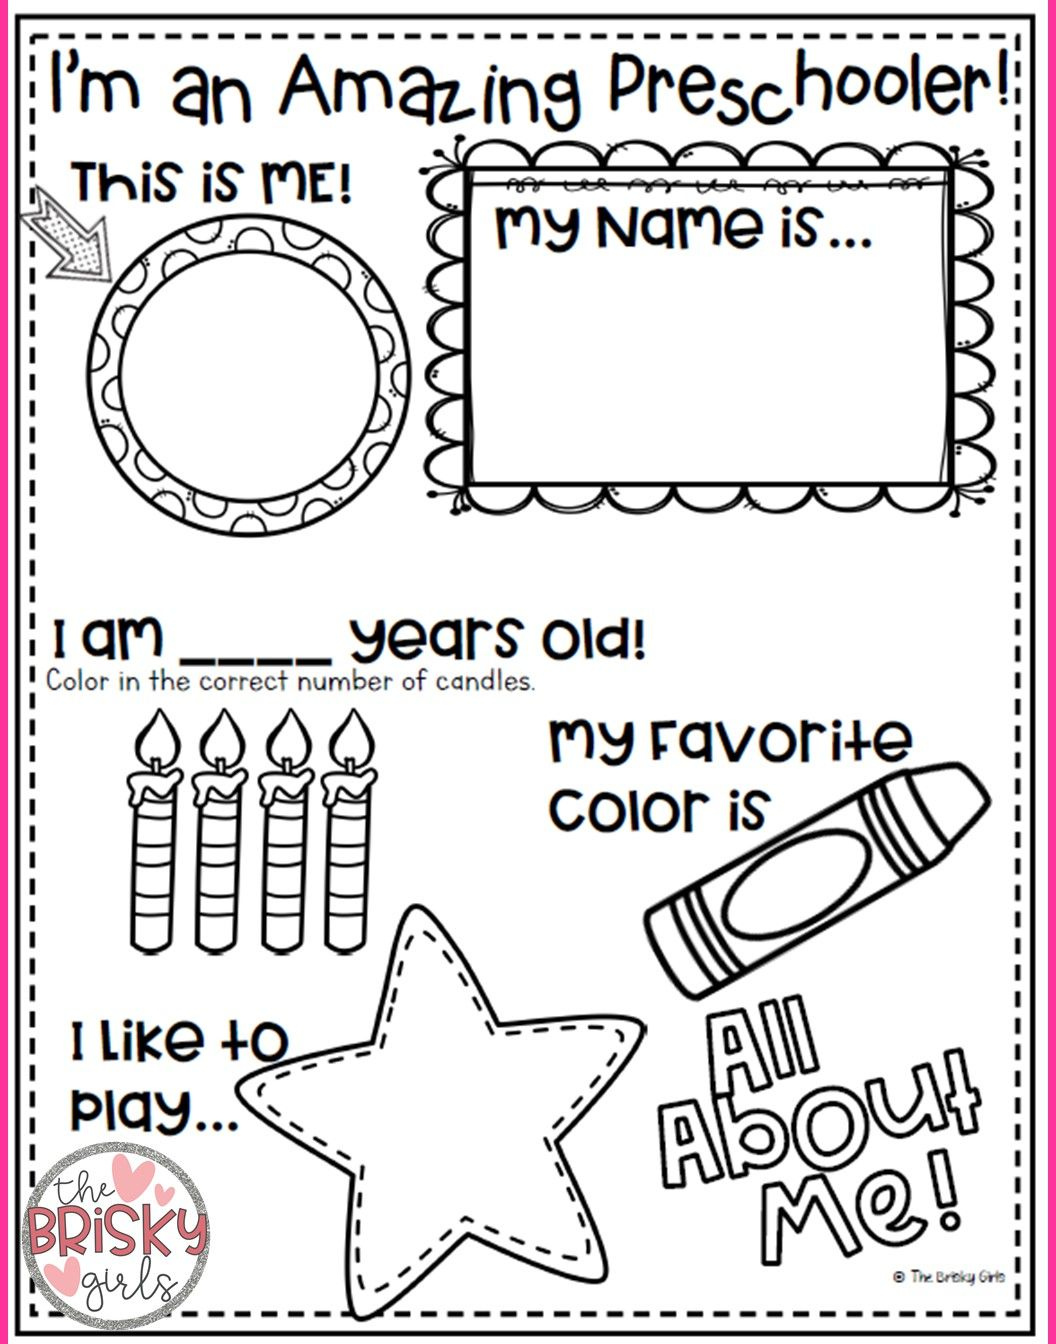 all-about-me-poster-preschool-free-printable-all-about-me-worksheets